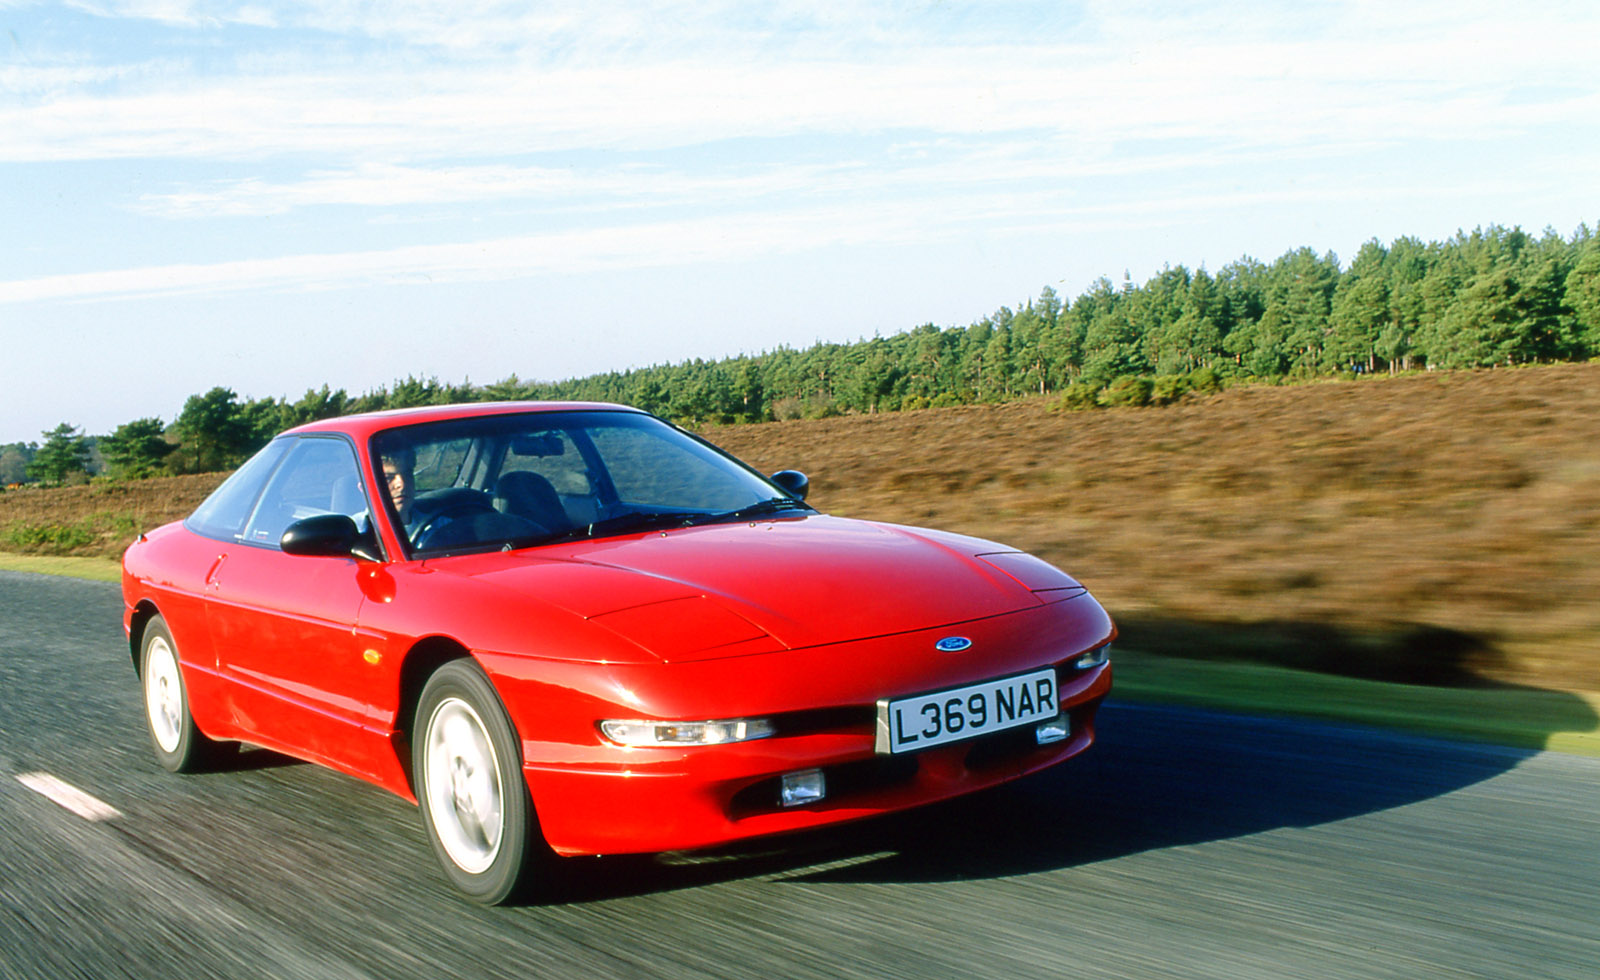 Used car buying guide: Ford Probe | Autocar